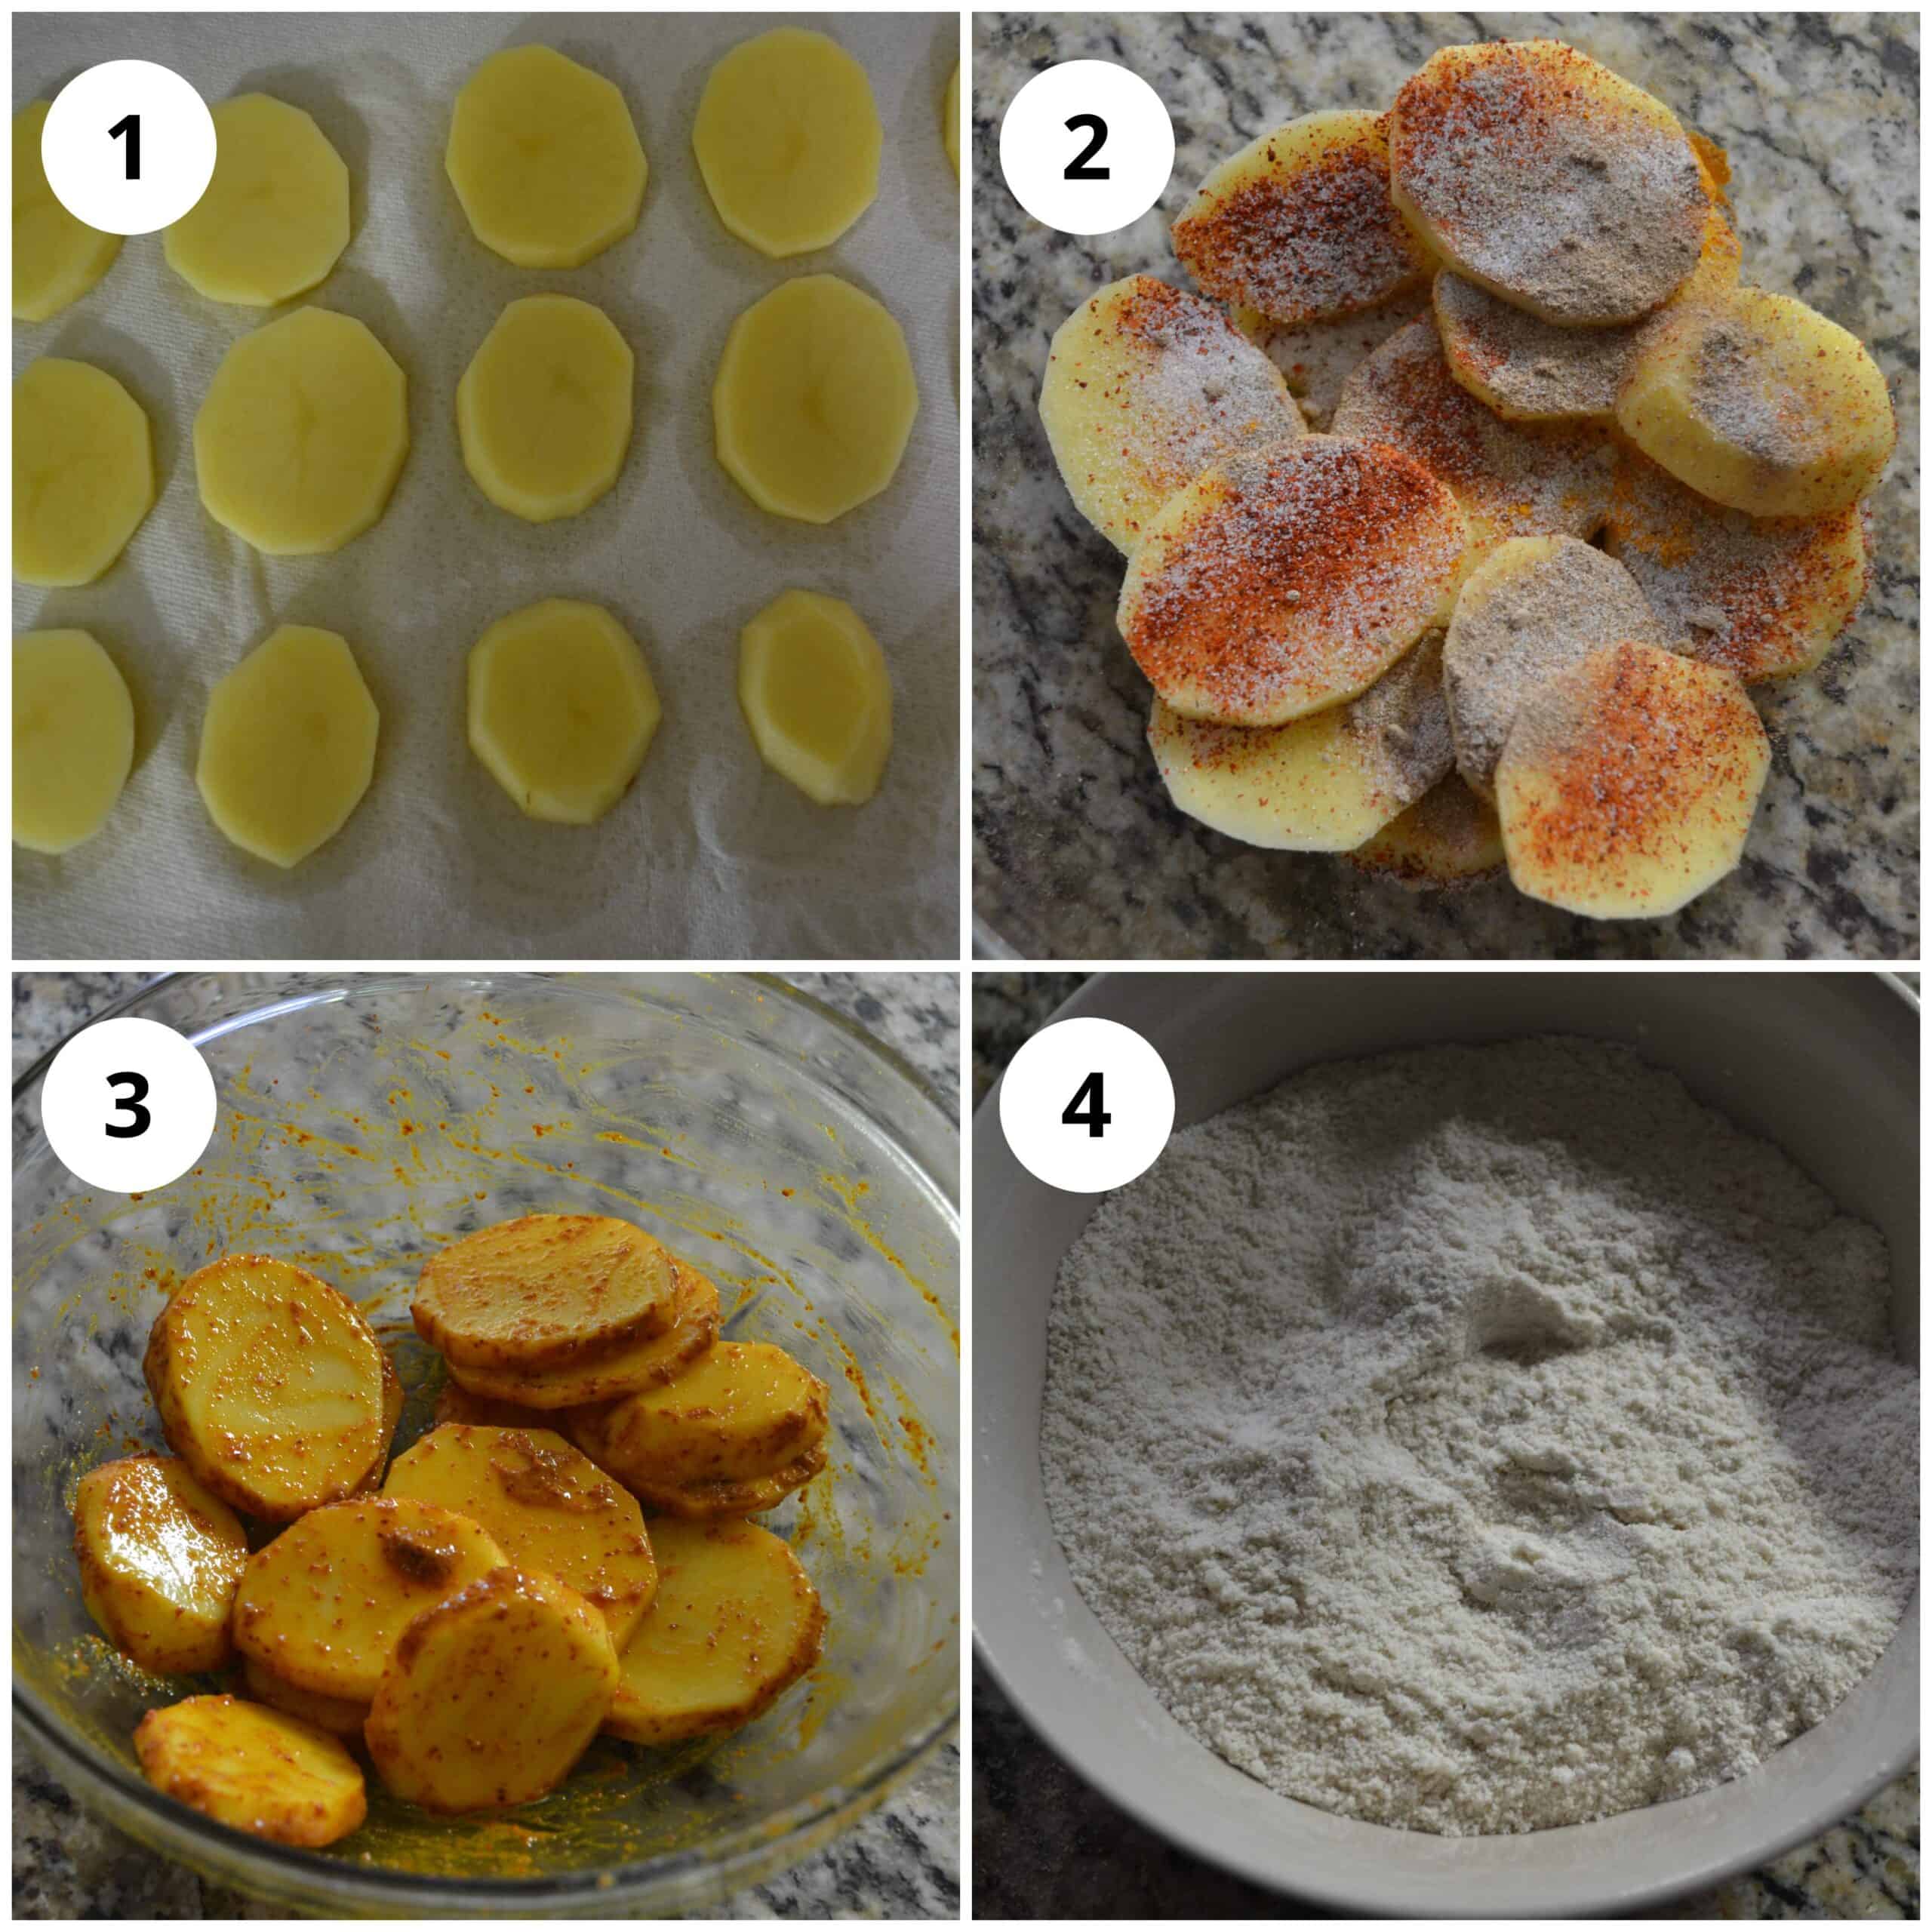 Four photos to show slicing of the potato chips and coating them in spices